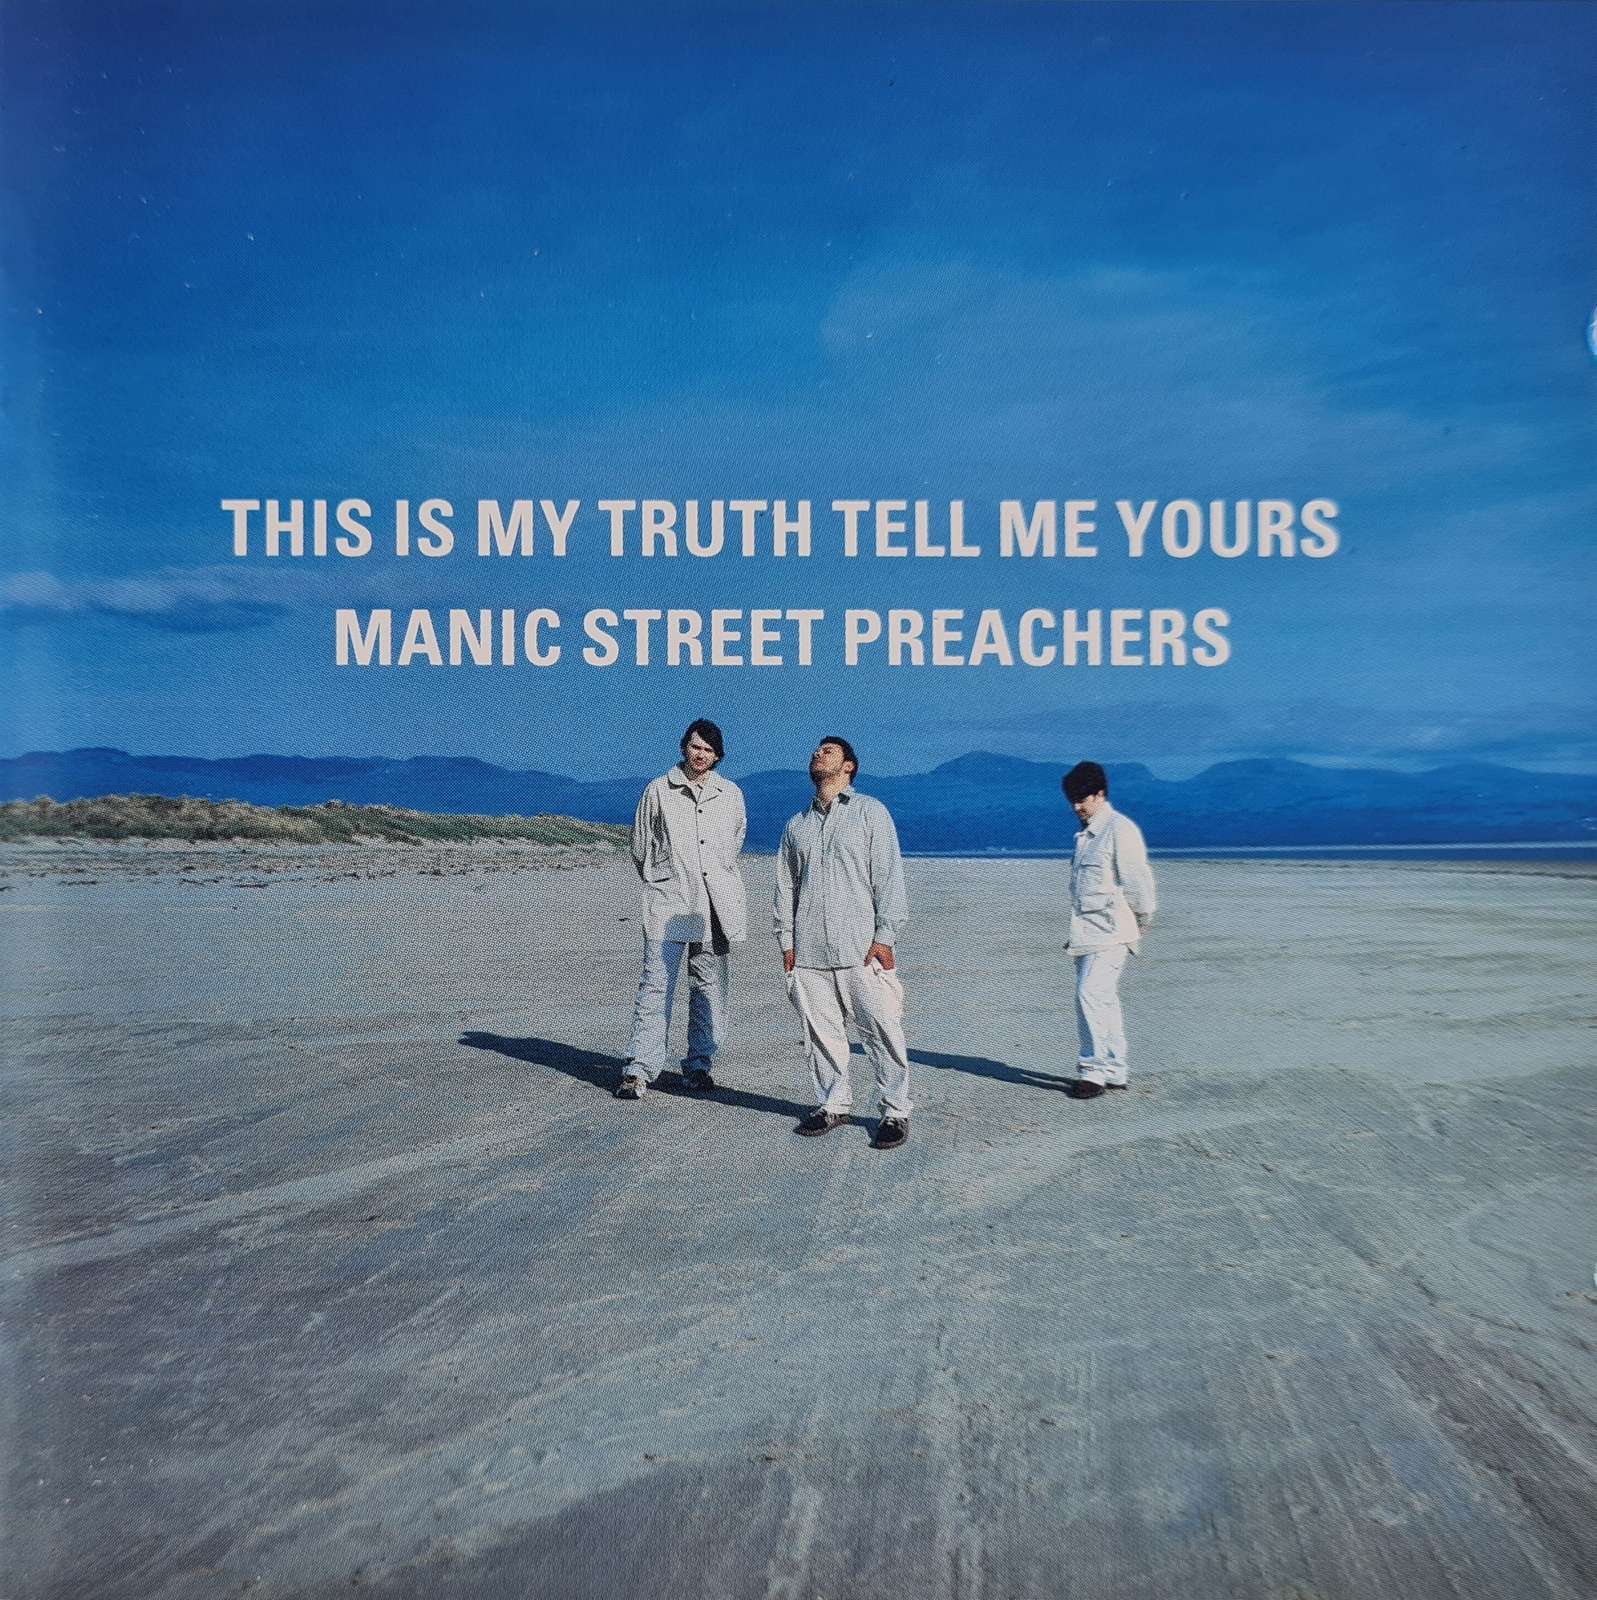 Manic Street Preachers - This is My Truth Tell Me Yours (CD)